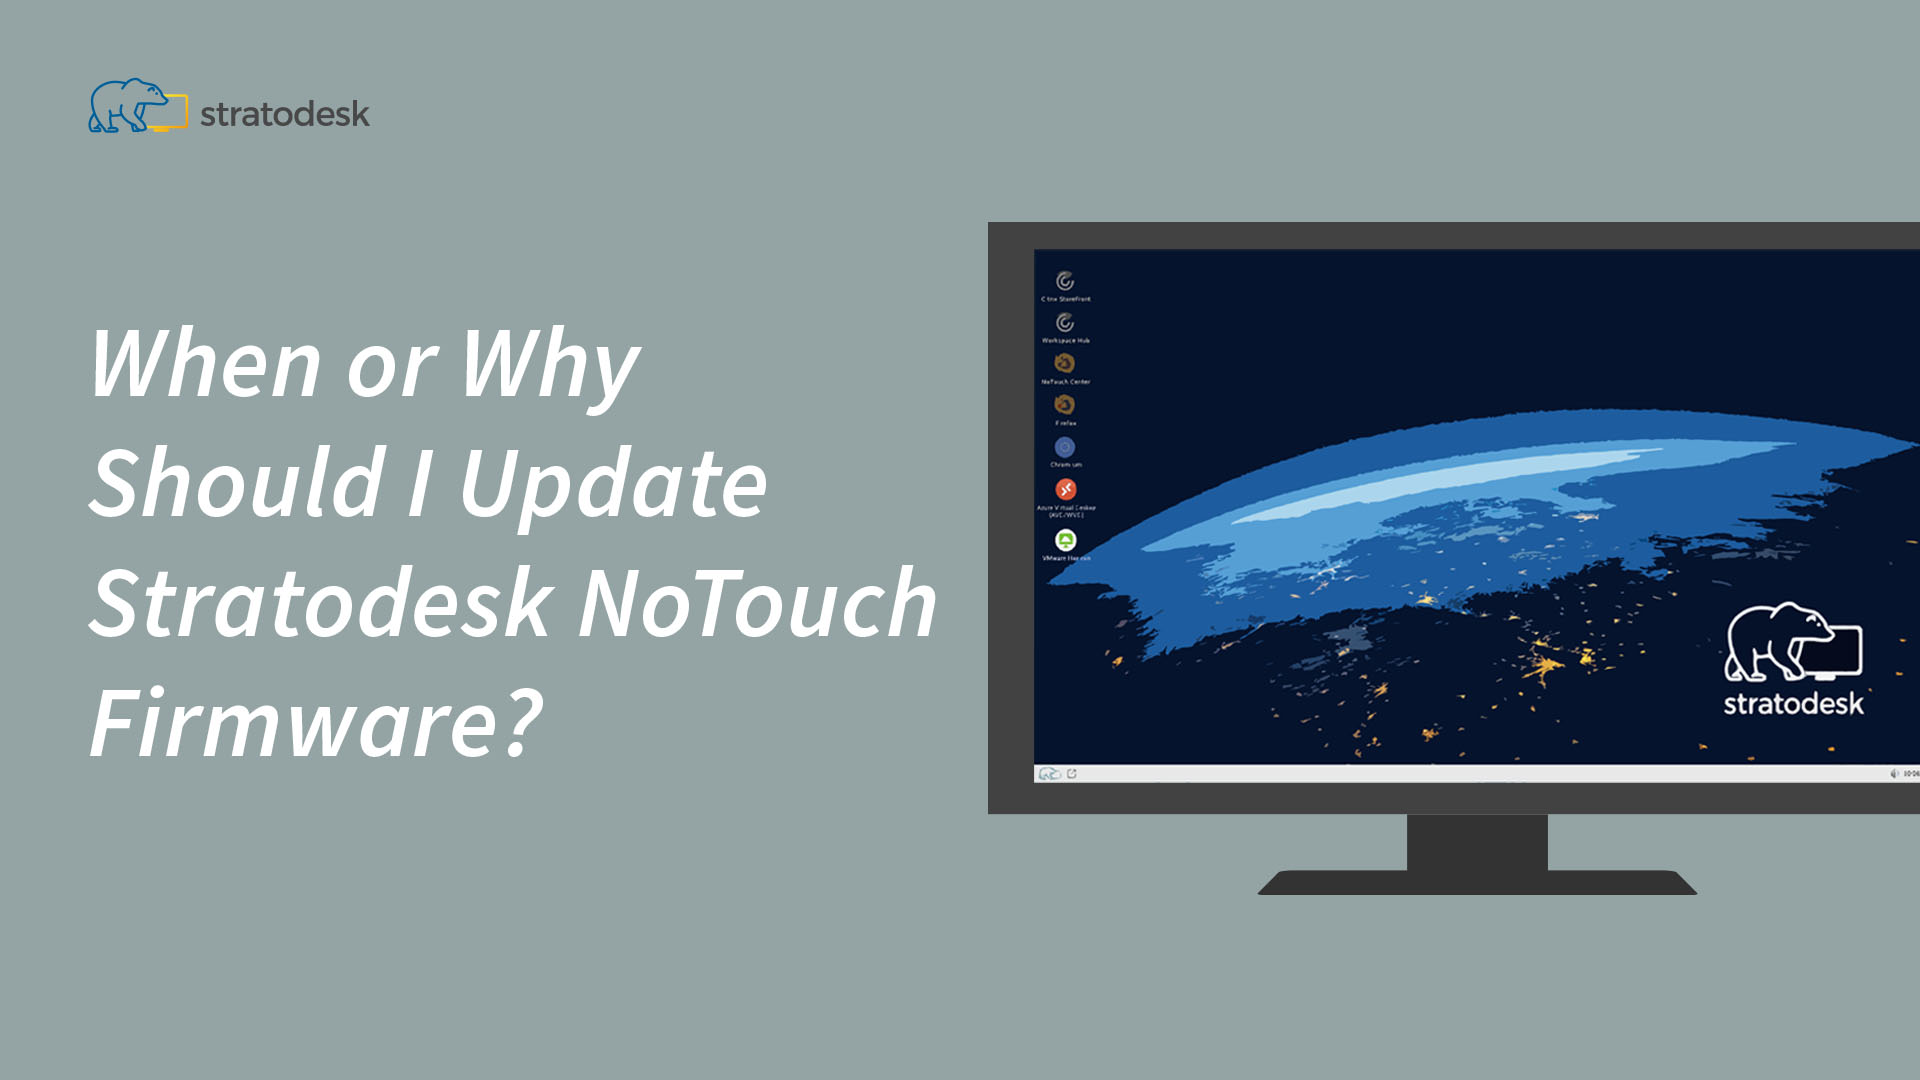 When or Why Should I Update Stratodesk NoTouch Firmware?